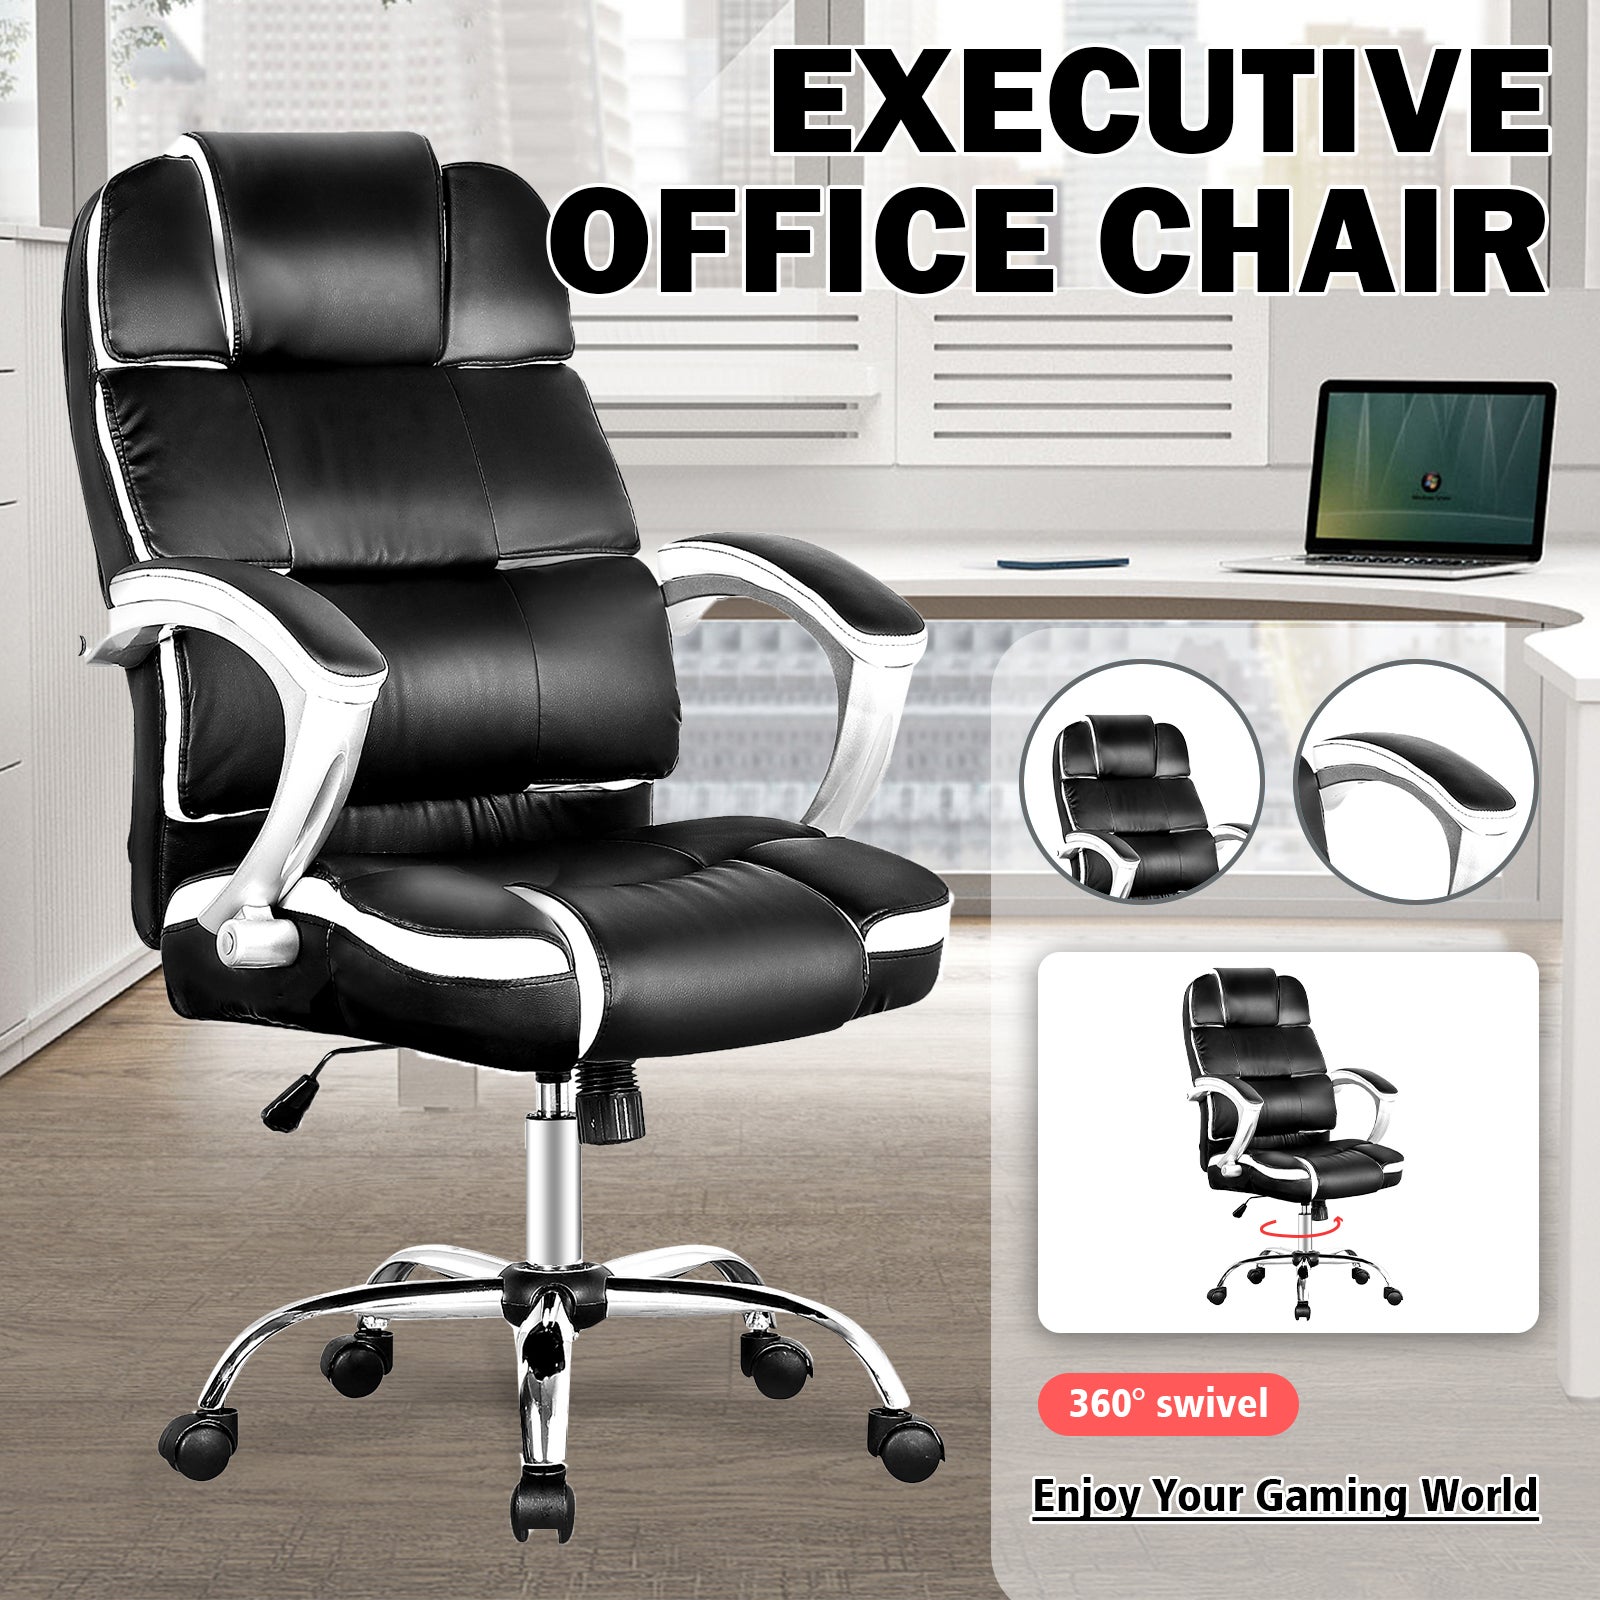 Advwin Executive Office Chair PU Leather Ergonomic High Back Computer Seat Racing Gaming Chair